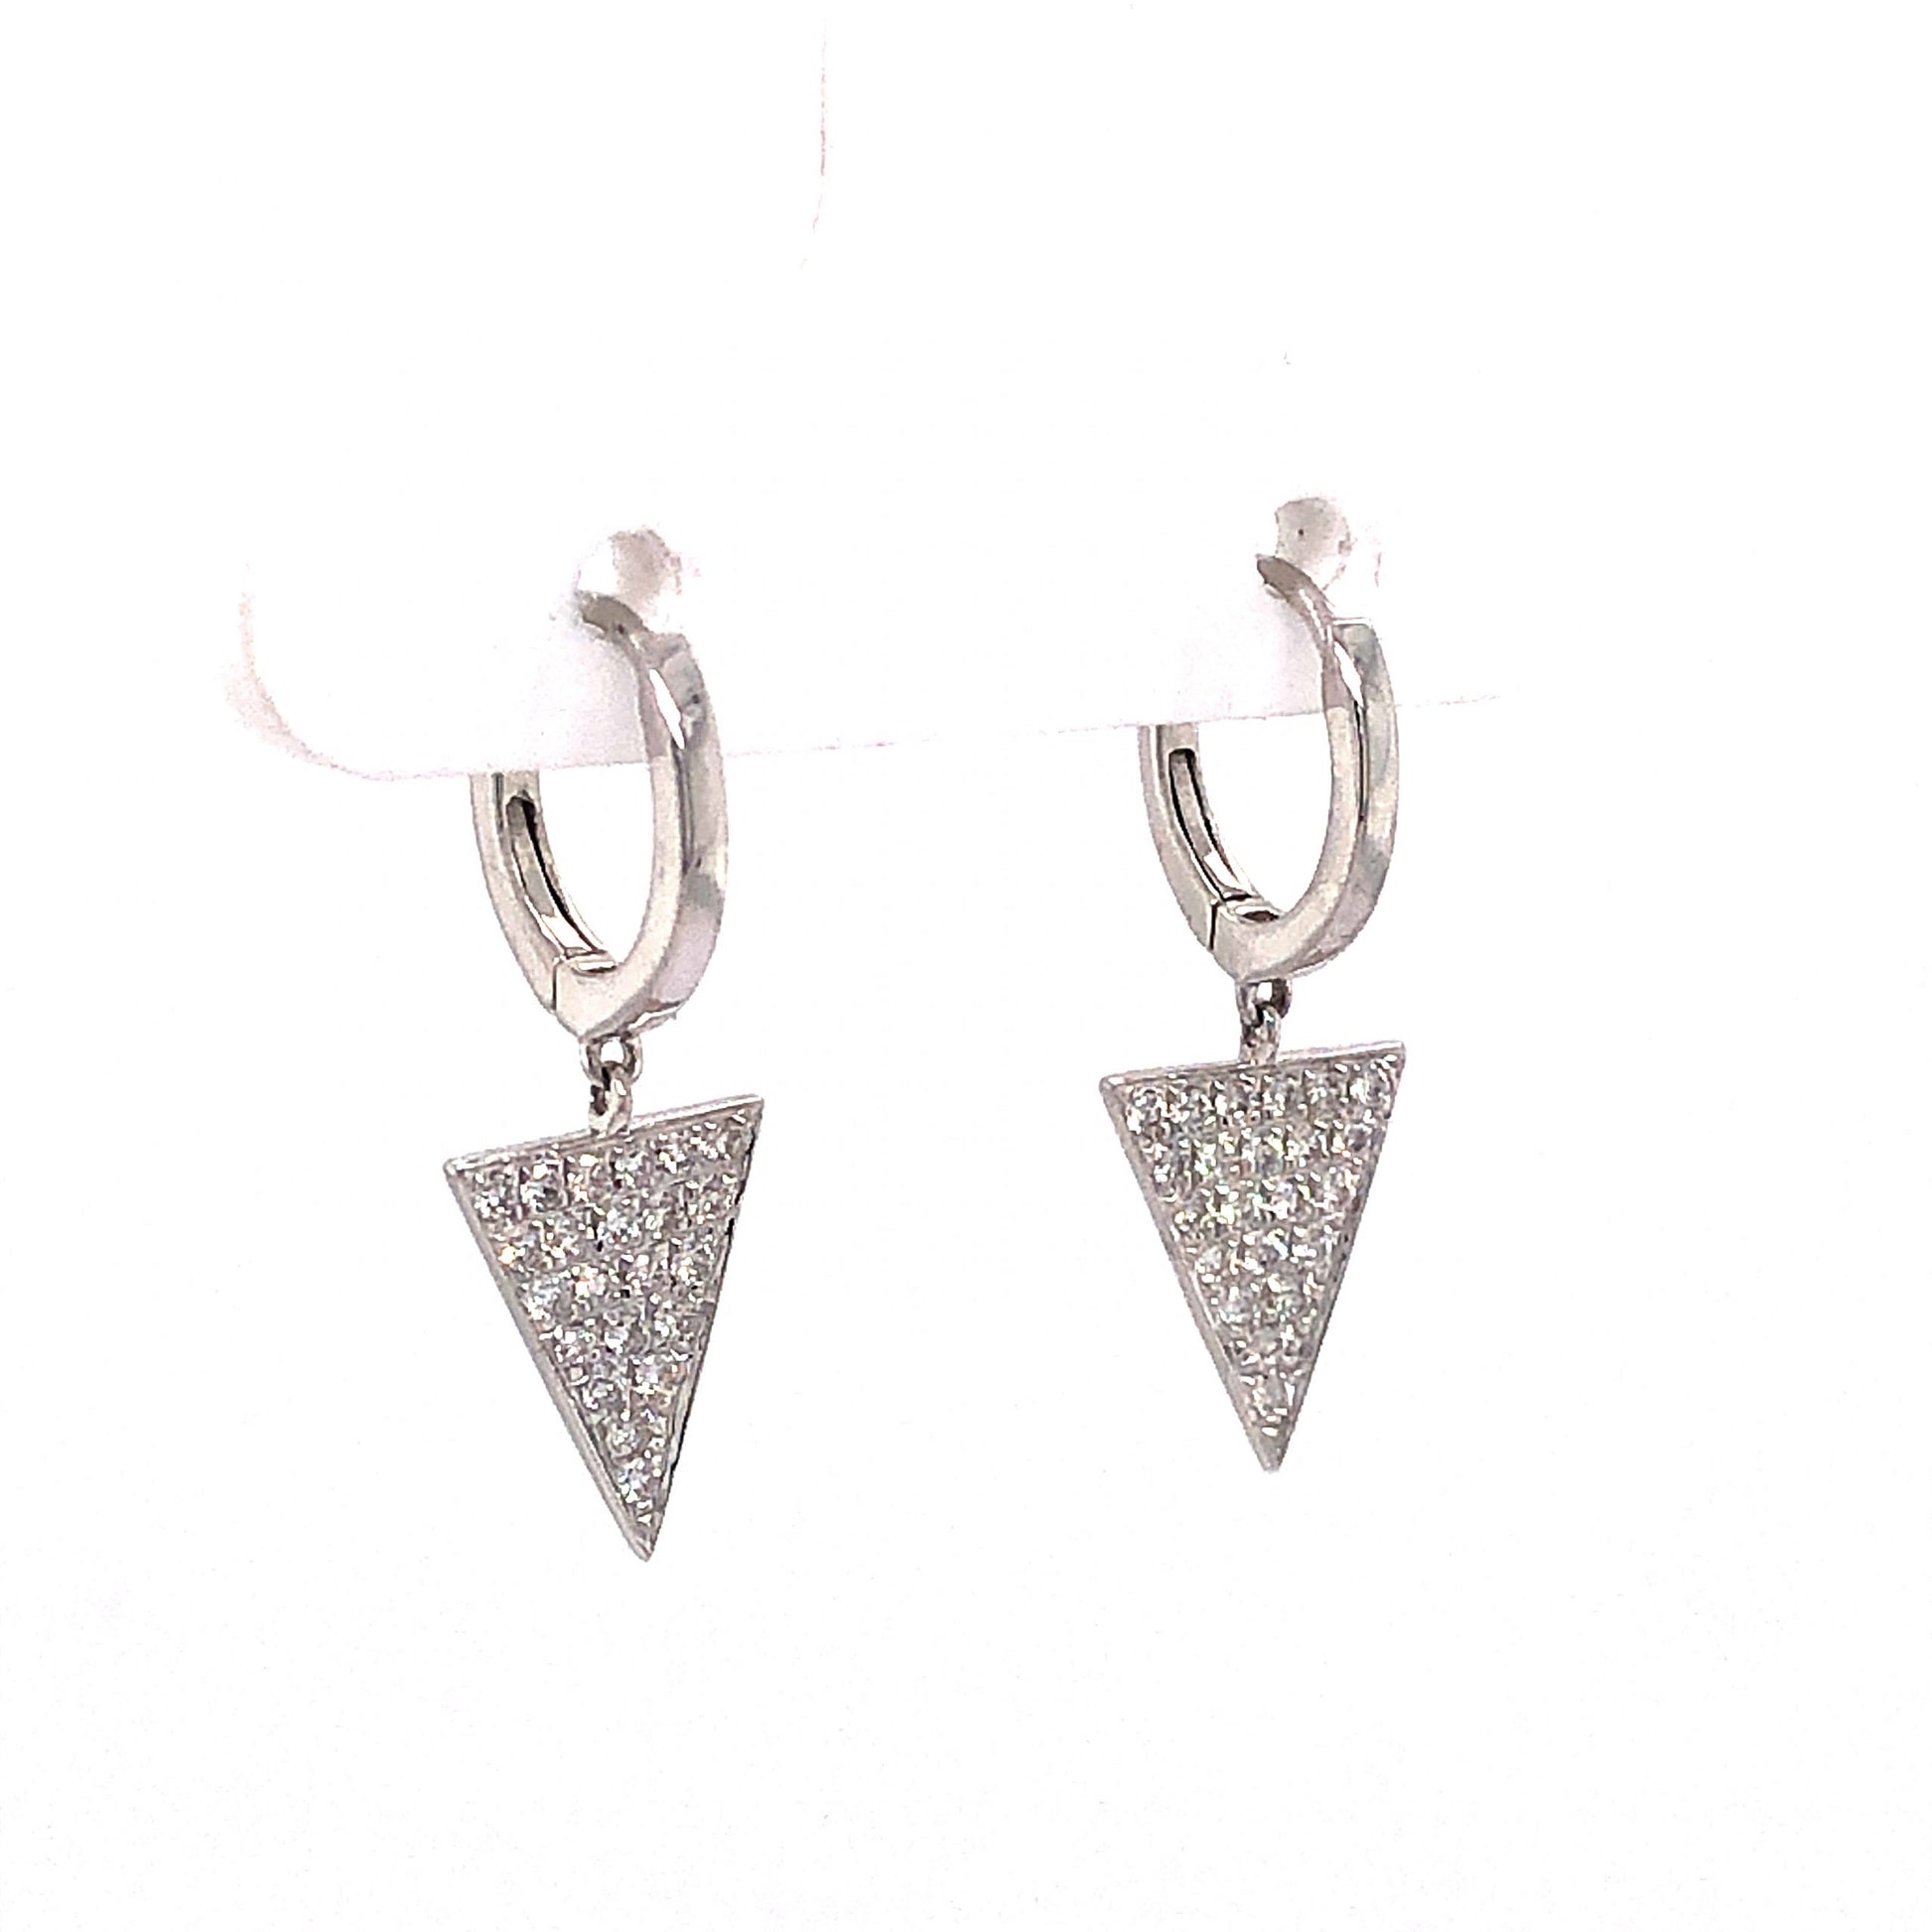 Pave Diamond Triangle Drop Earrings in 14k White GoldComposition: 14 Karat White GoldTotal Diamond Weight: .22 ctTotal Gram Weight: 1.5 gInscription: 14k